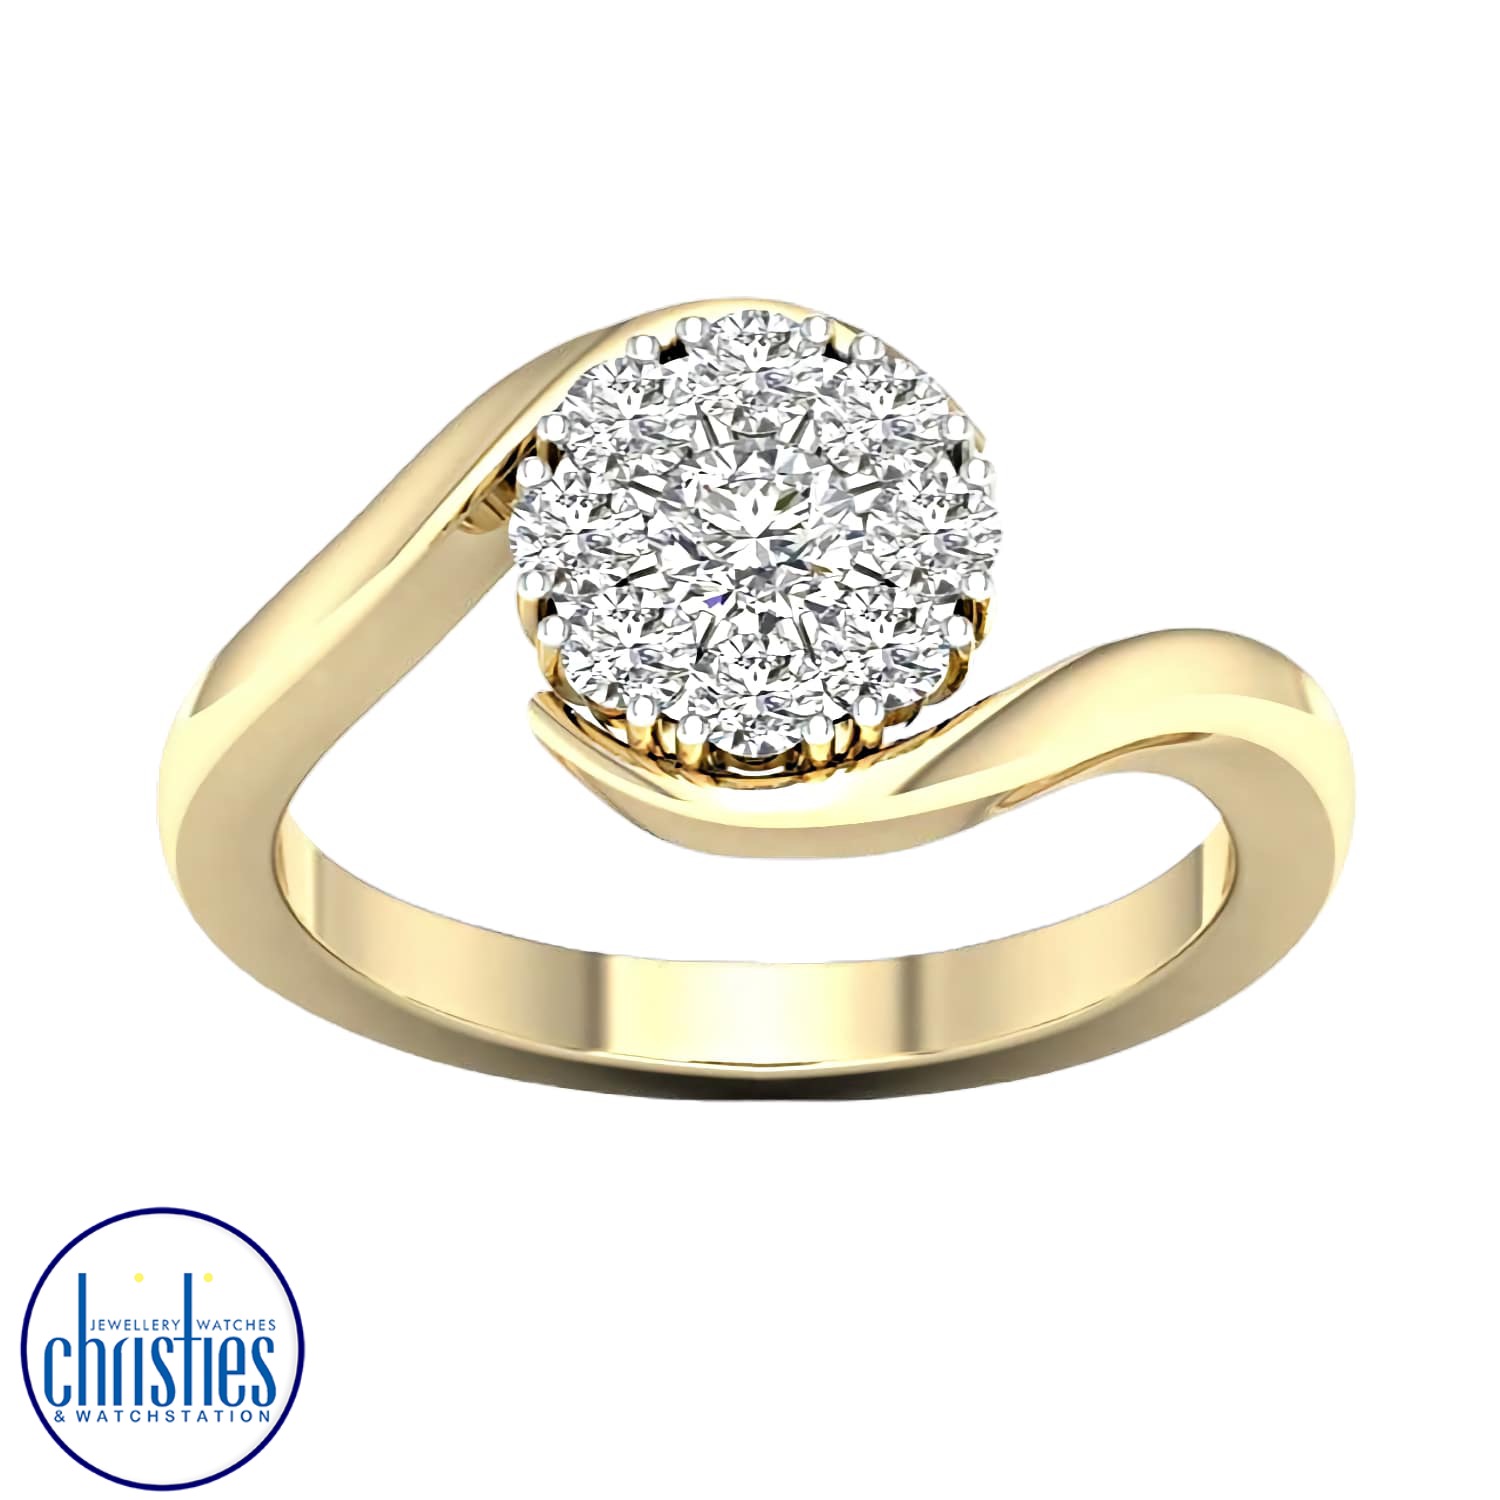 9ct Yellow Gold Diamond Engagement Ring  0.50ct TDW RF17892.  Affordable Engagement Rings Nz $2,150.00